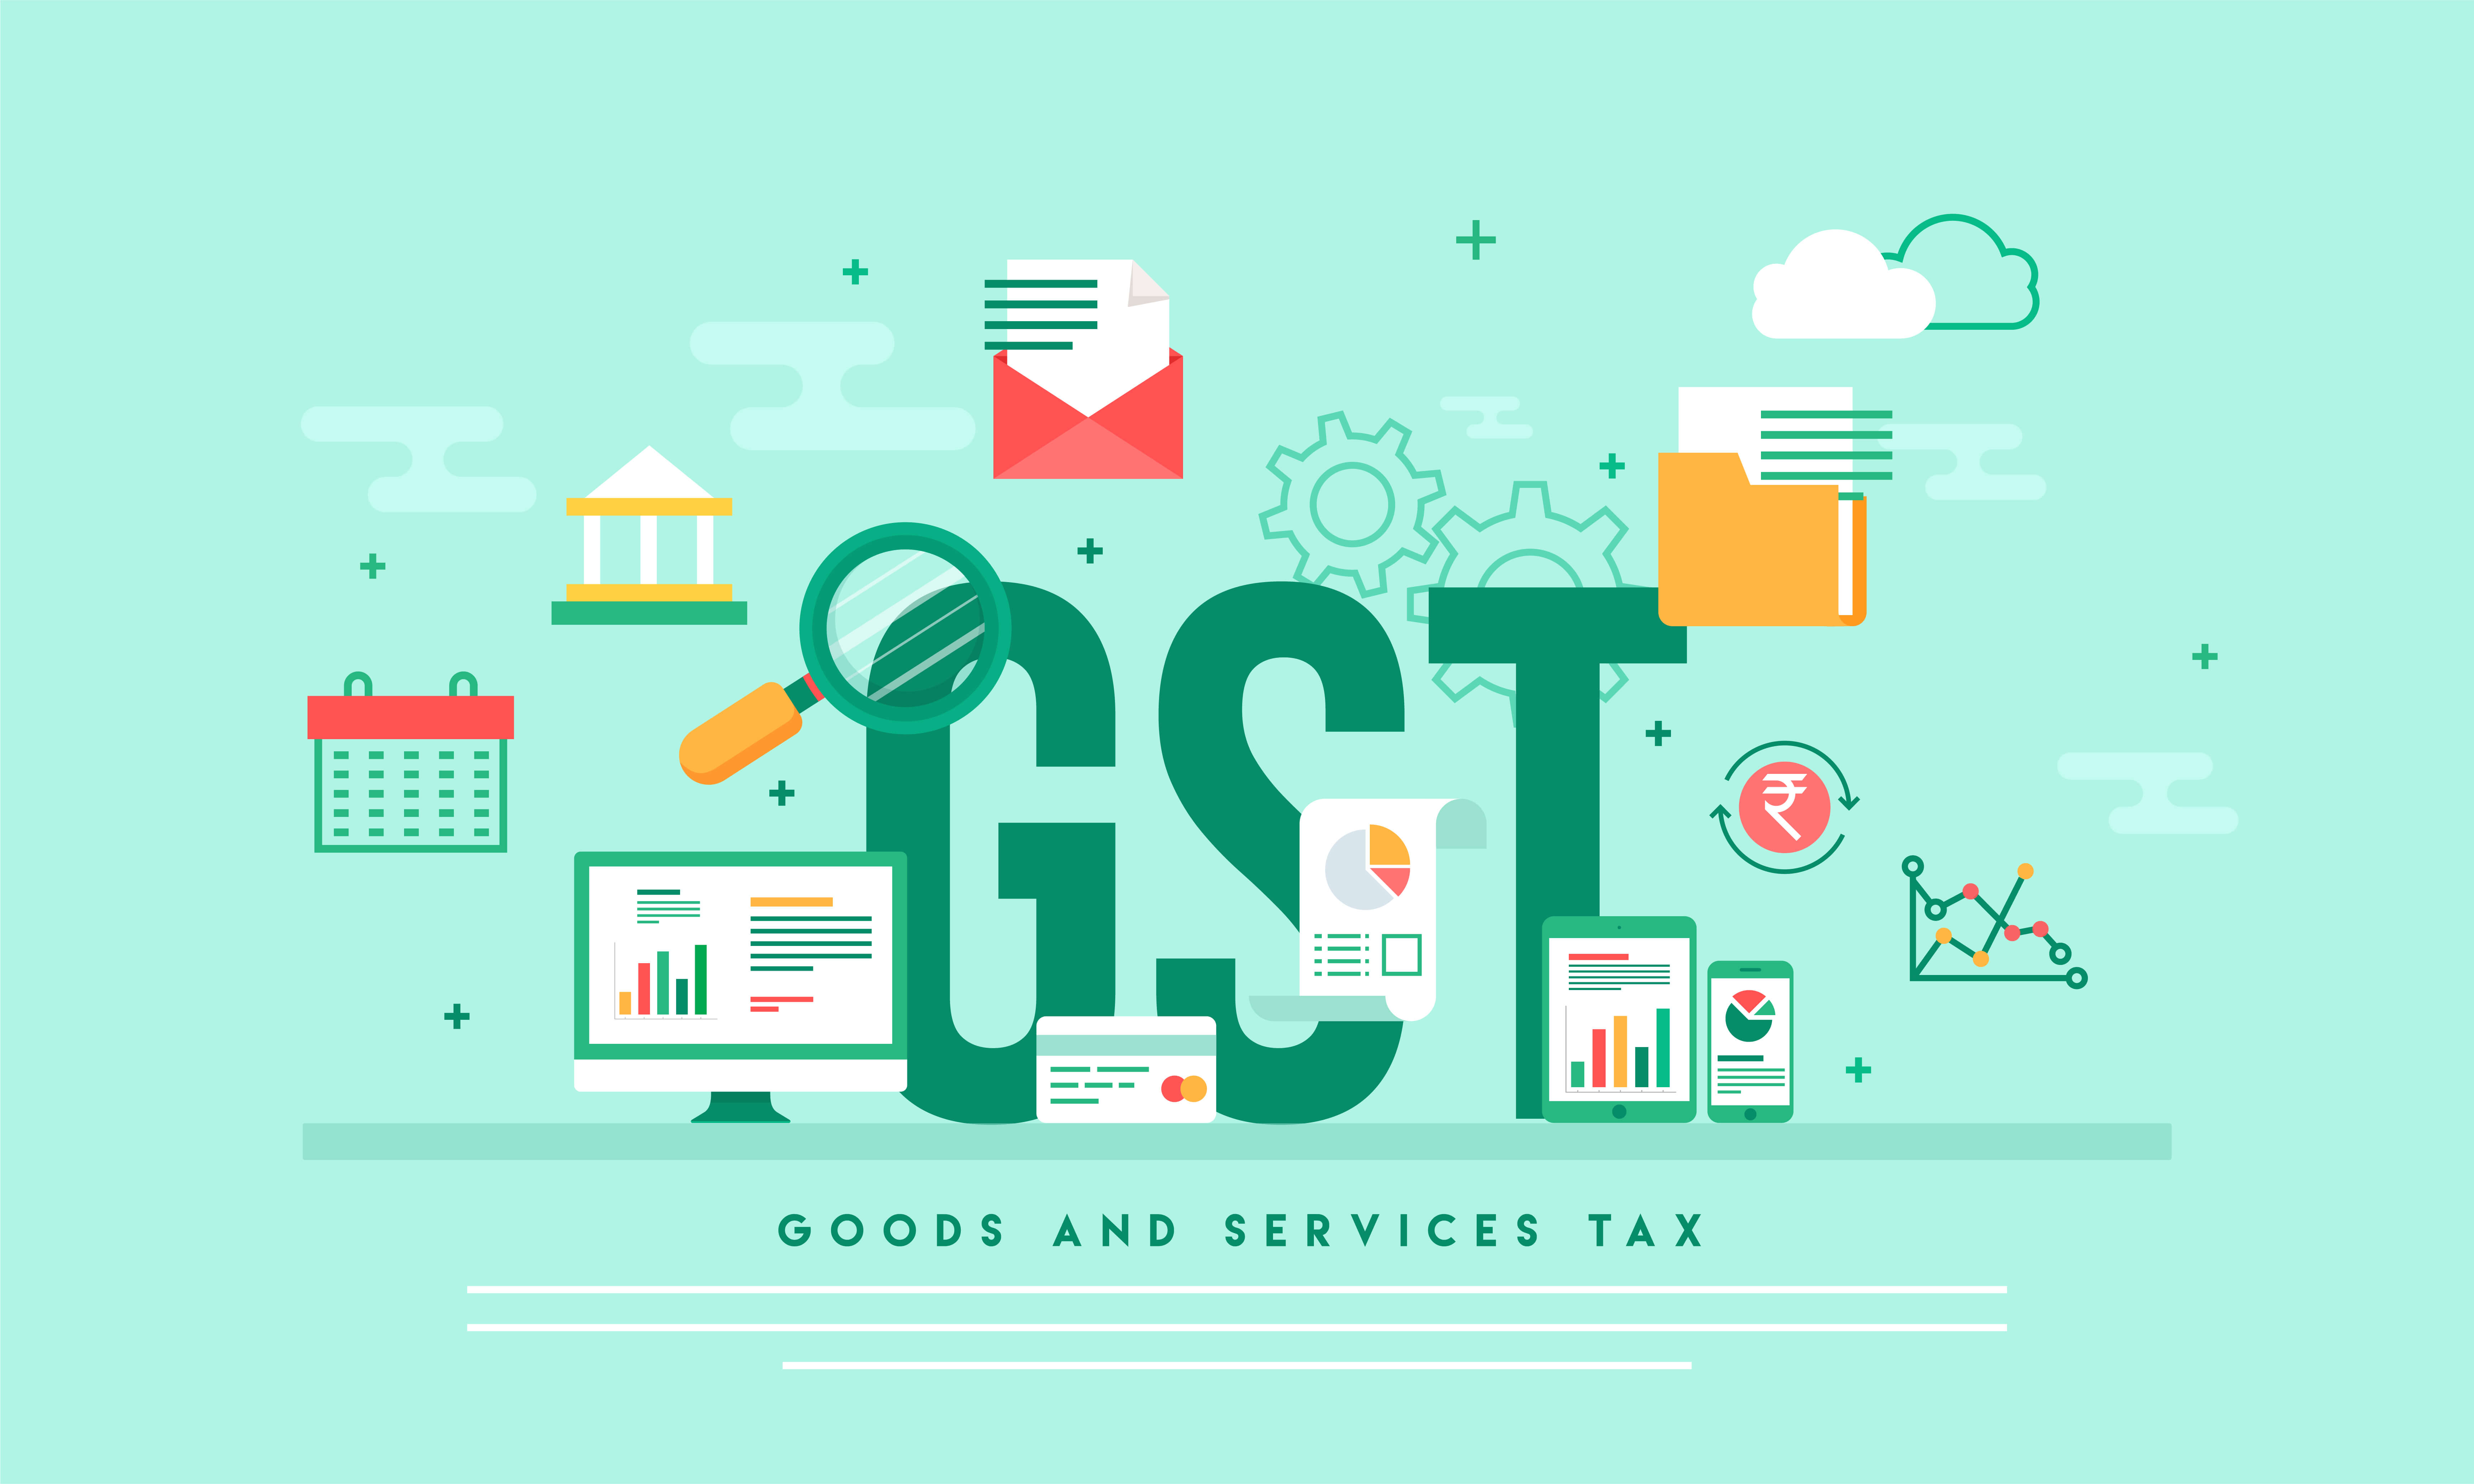 transformational-journey-of-gst-either-view